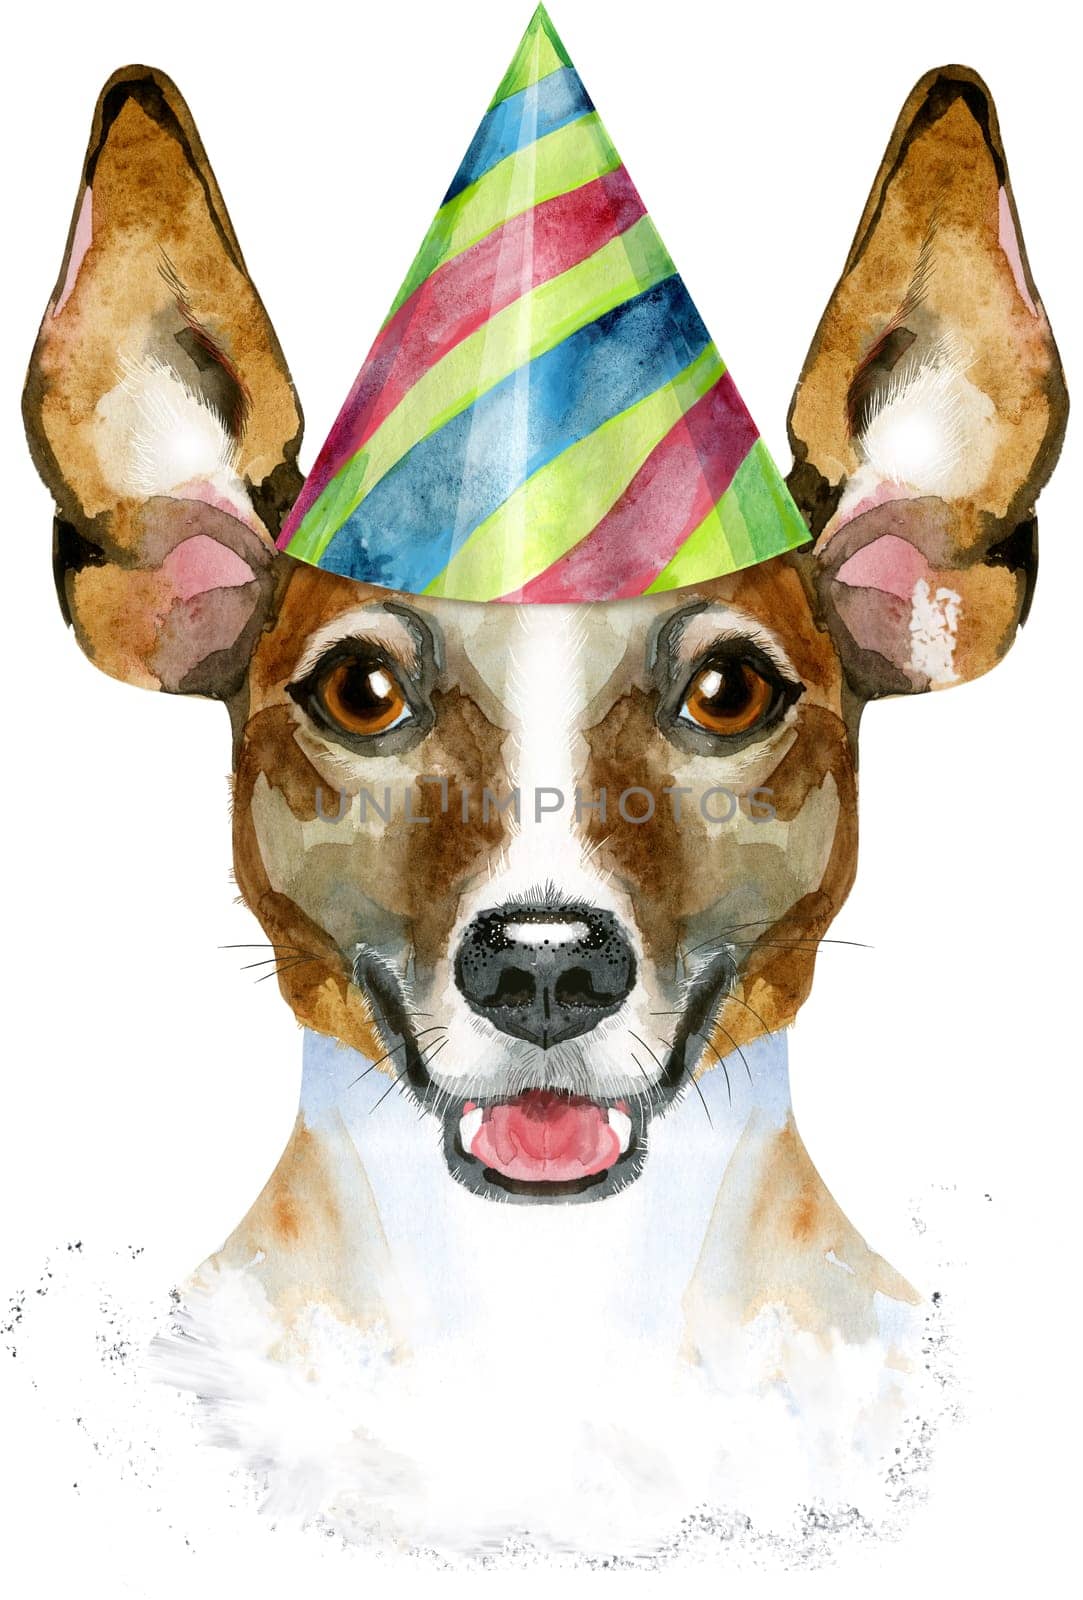 Cute Dog in party hat. Dog T-shirt graphics. watercolor jack russell terrier illustration